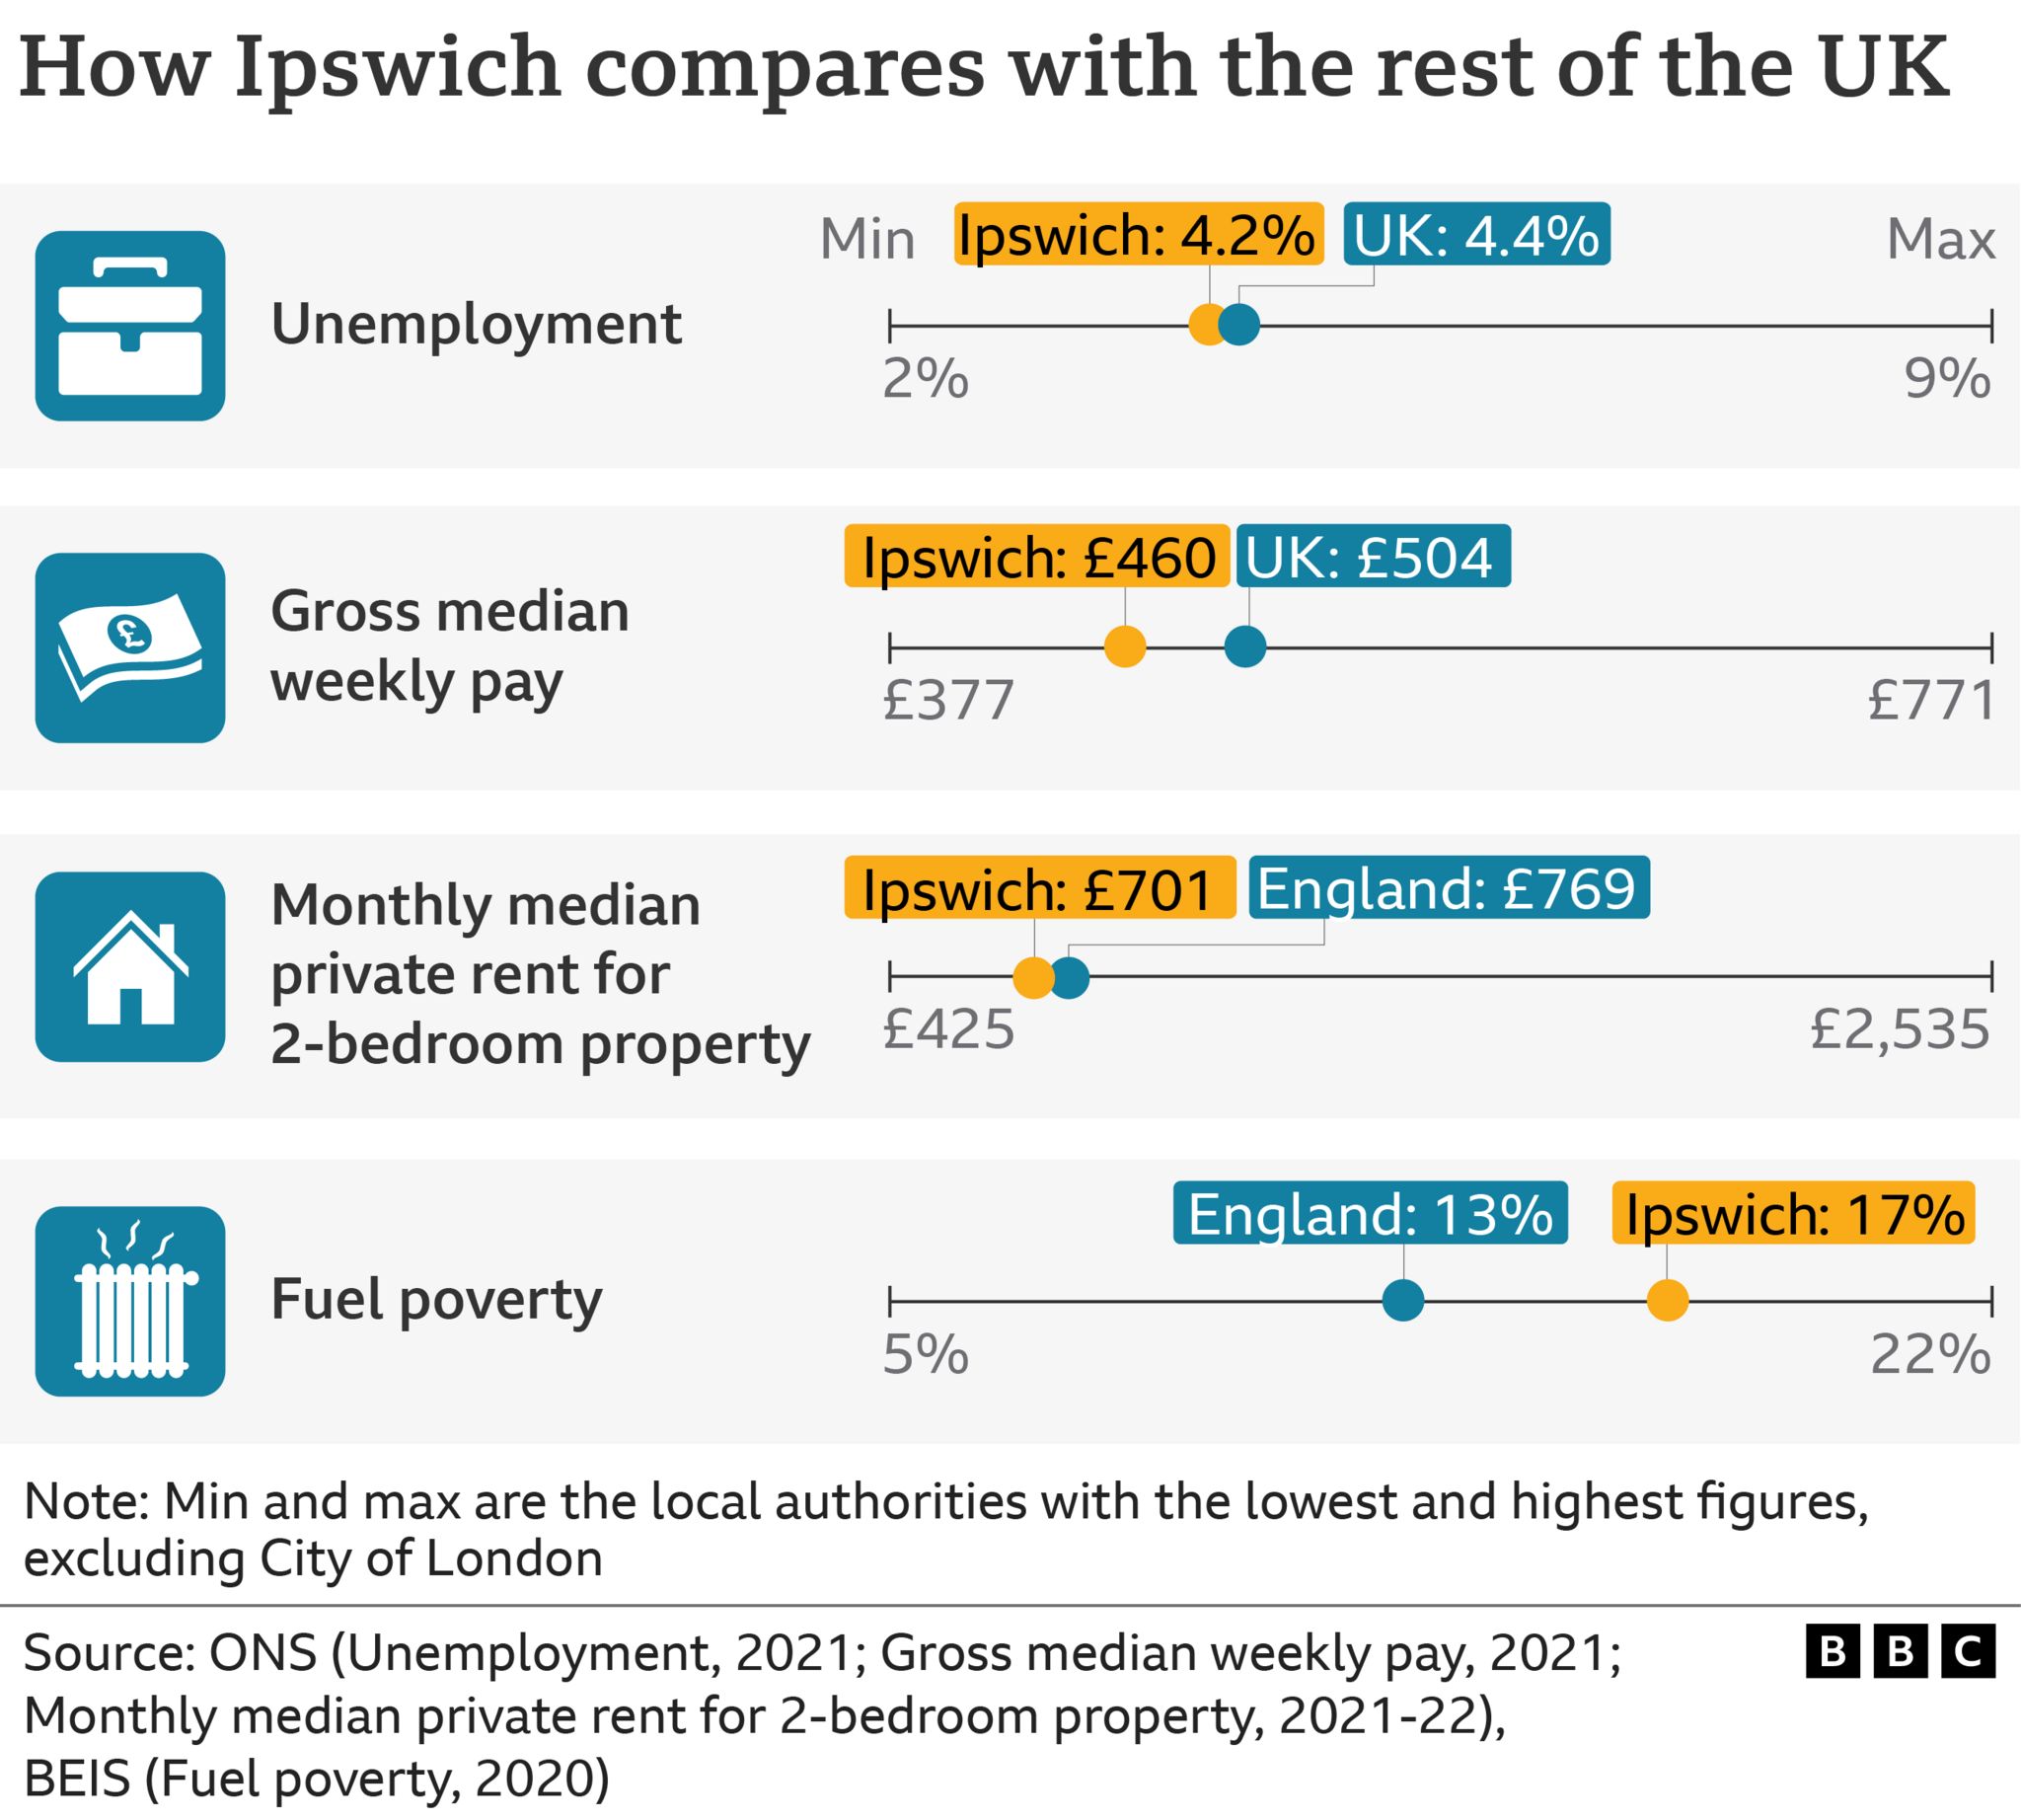 Graphic showing how Ipswich compares with the rest of the UK - it has lower unemployment than average, lower gross median weekly pay, monthly median private rent for a 2-bedroom property is lower than average, and it's rate of fuel poverty is higher than average